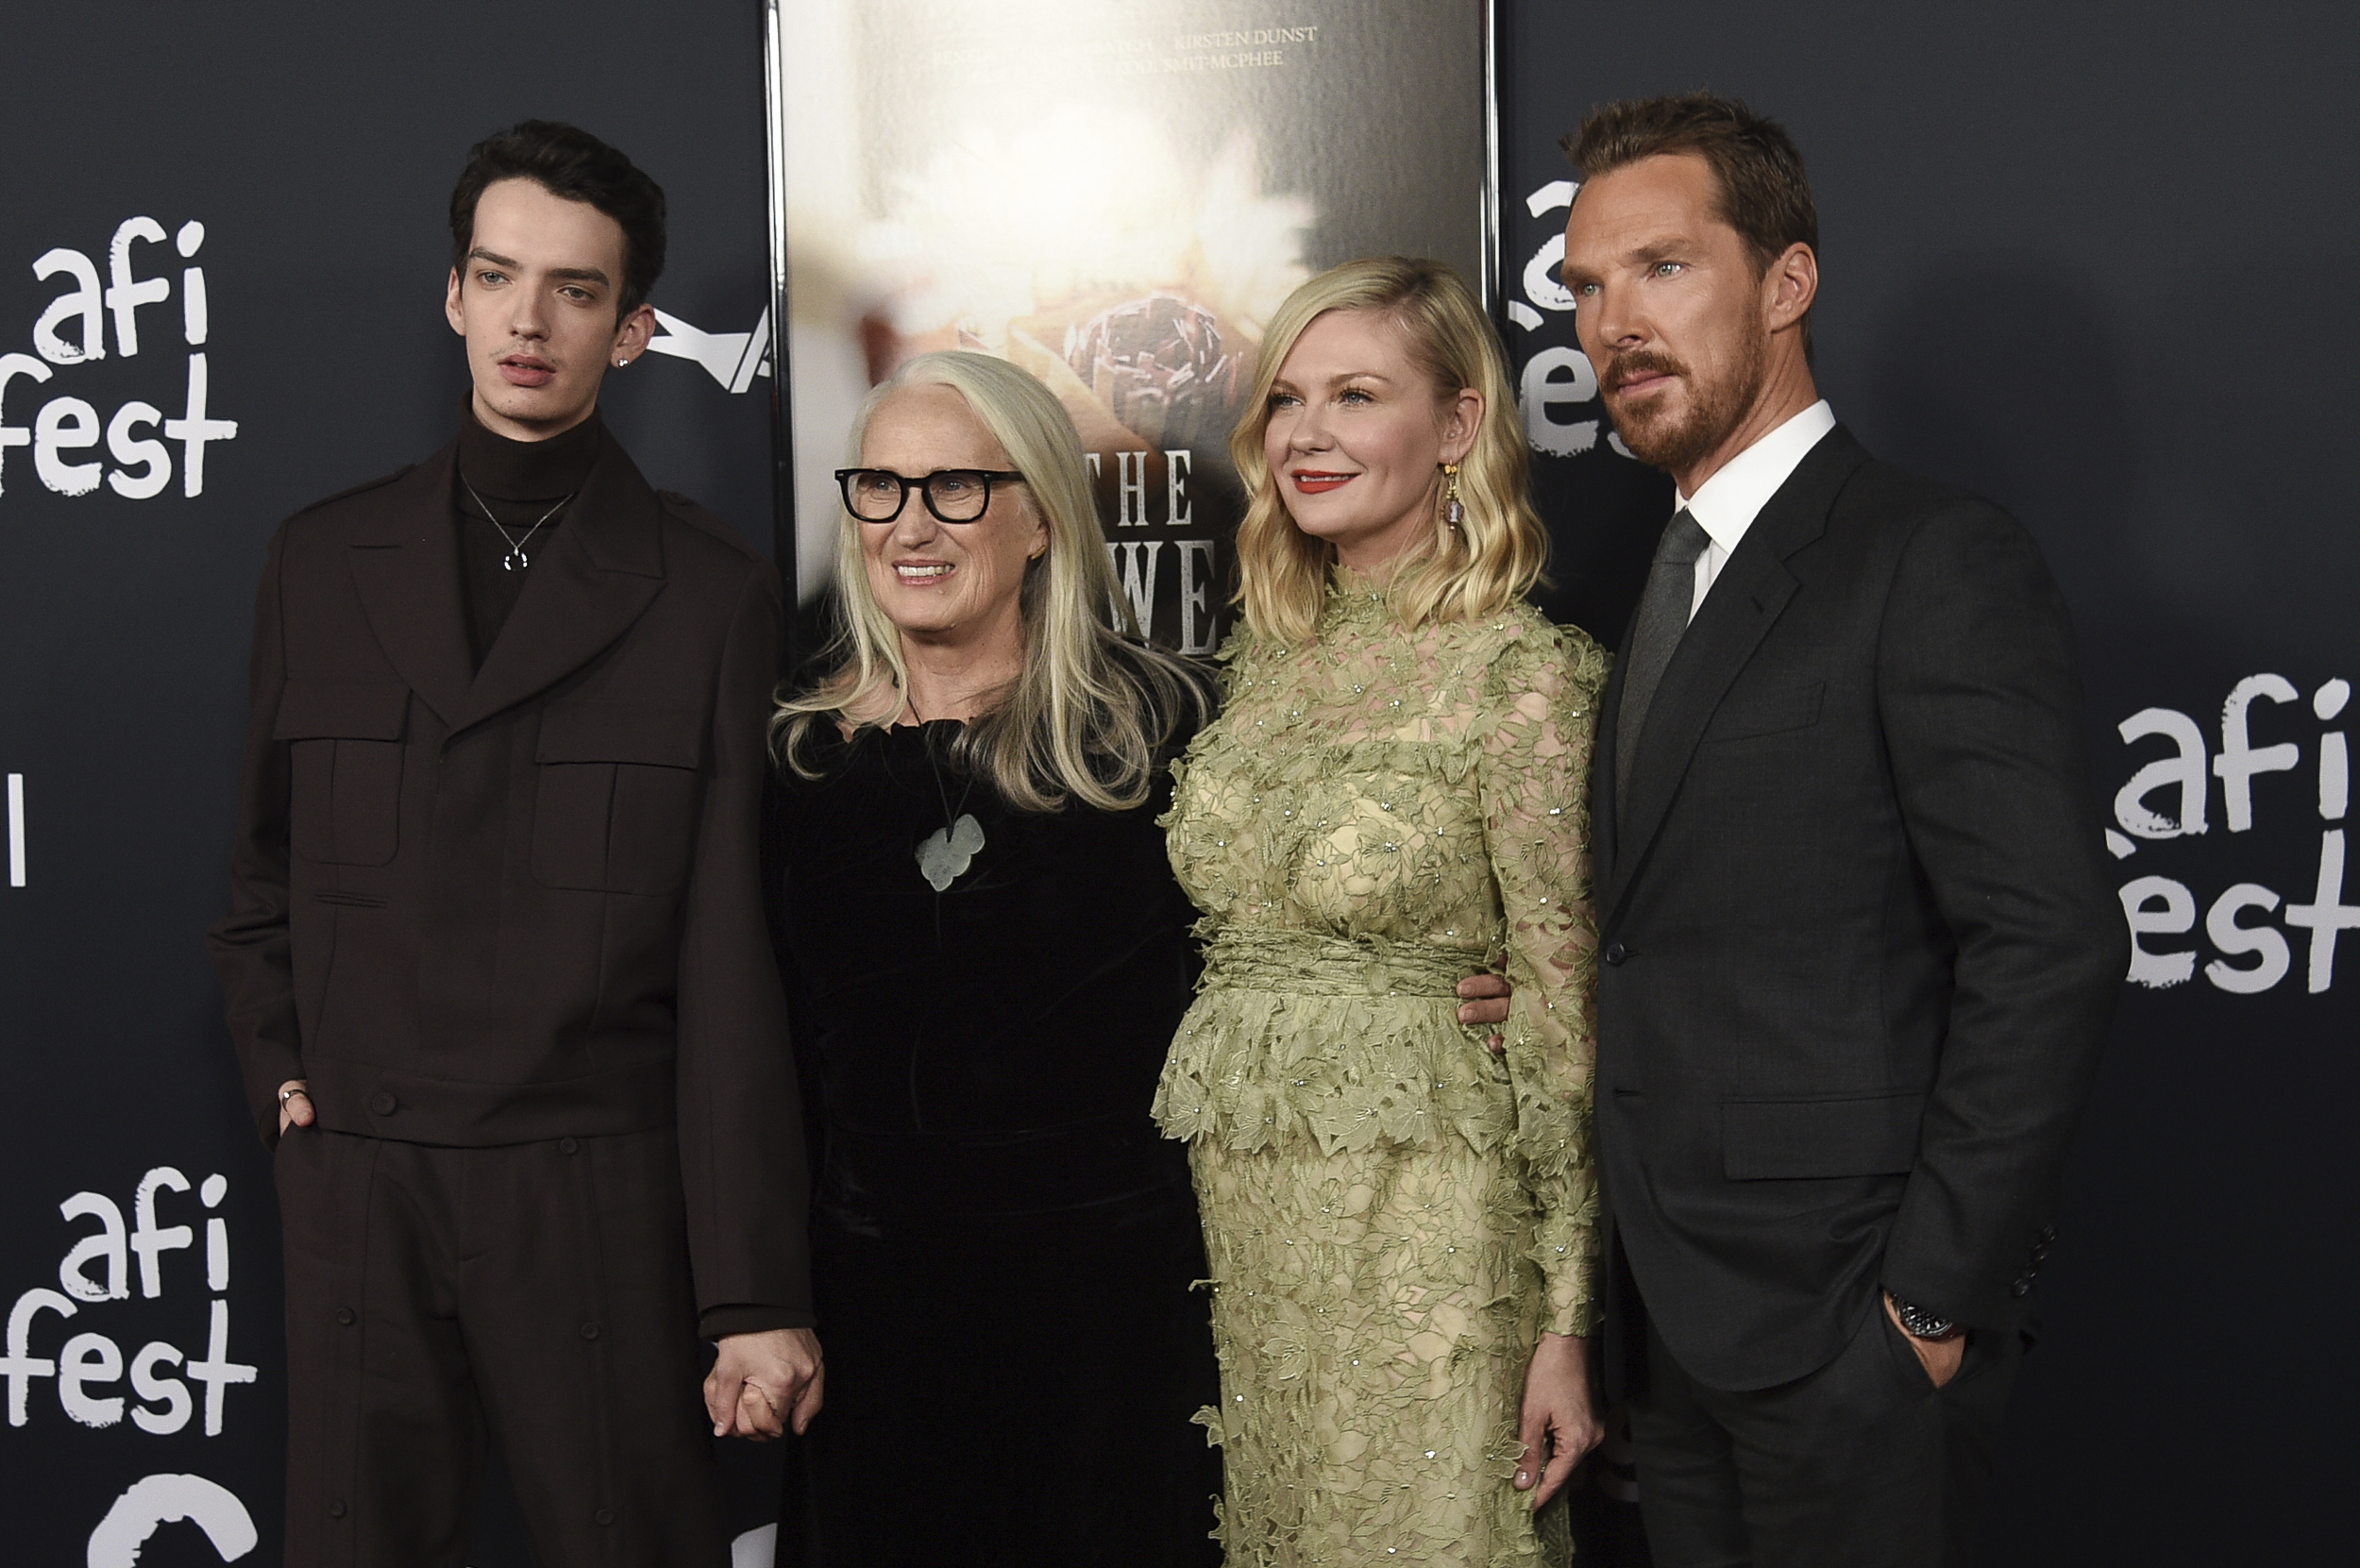 Kodi Smit-McPhee, Jane Campion, Kirsten Dunst and Benedict Cumberbatch, from left, arrive at "The Power of the Dog" during the American Film Institute festival Thursday, Nov. 11, 2021